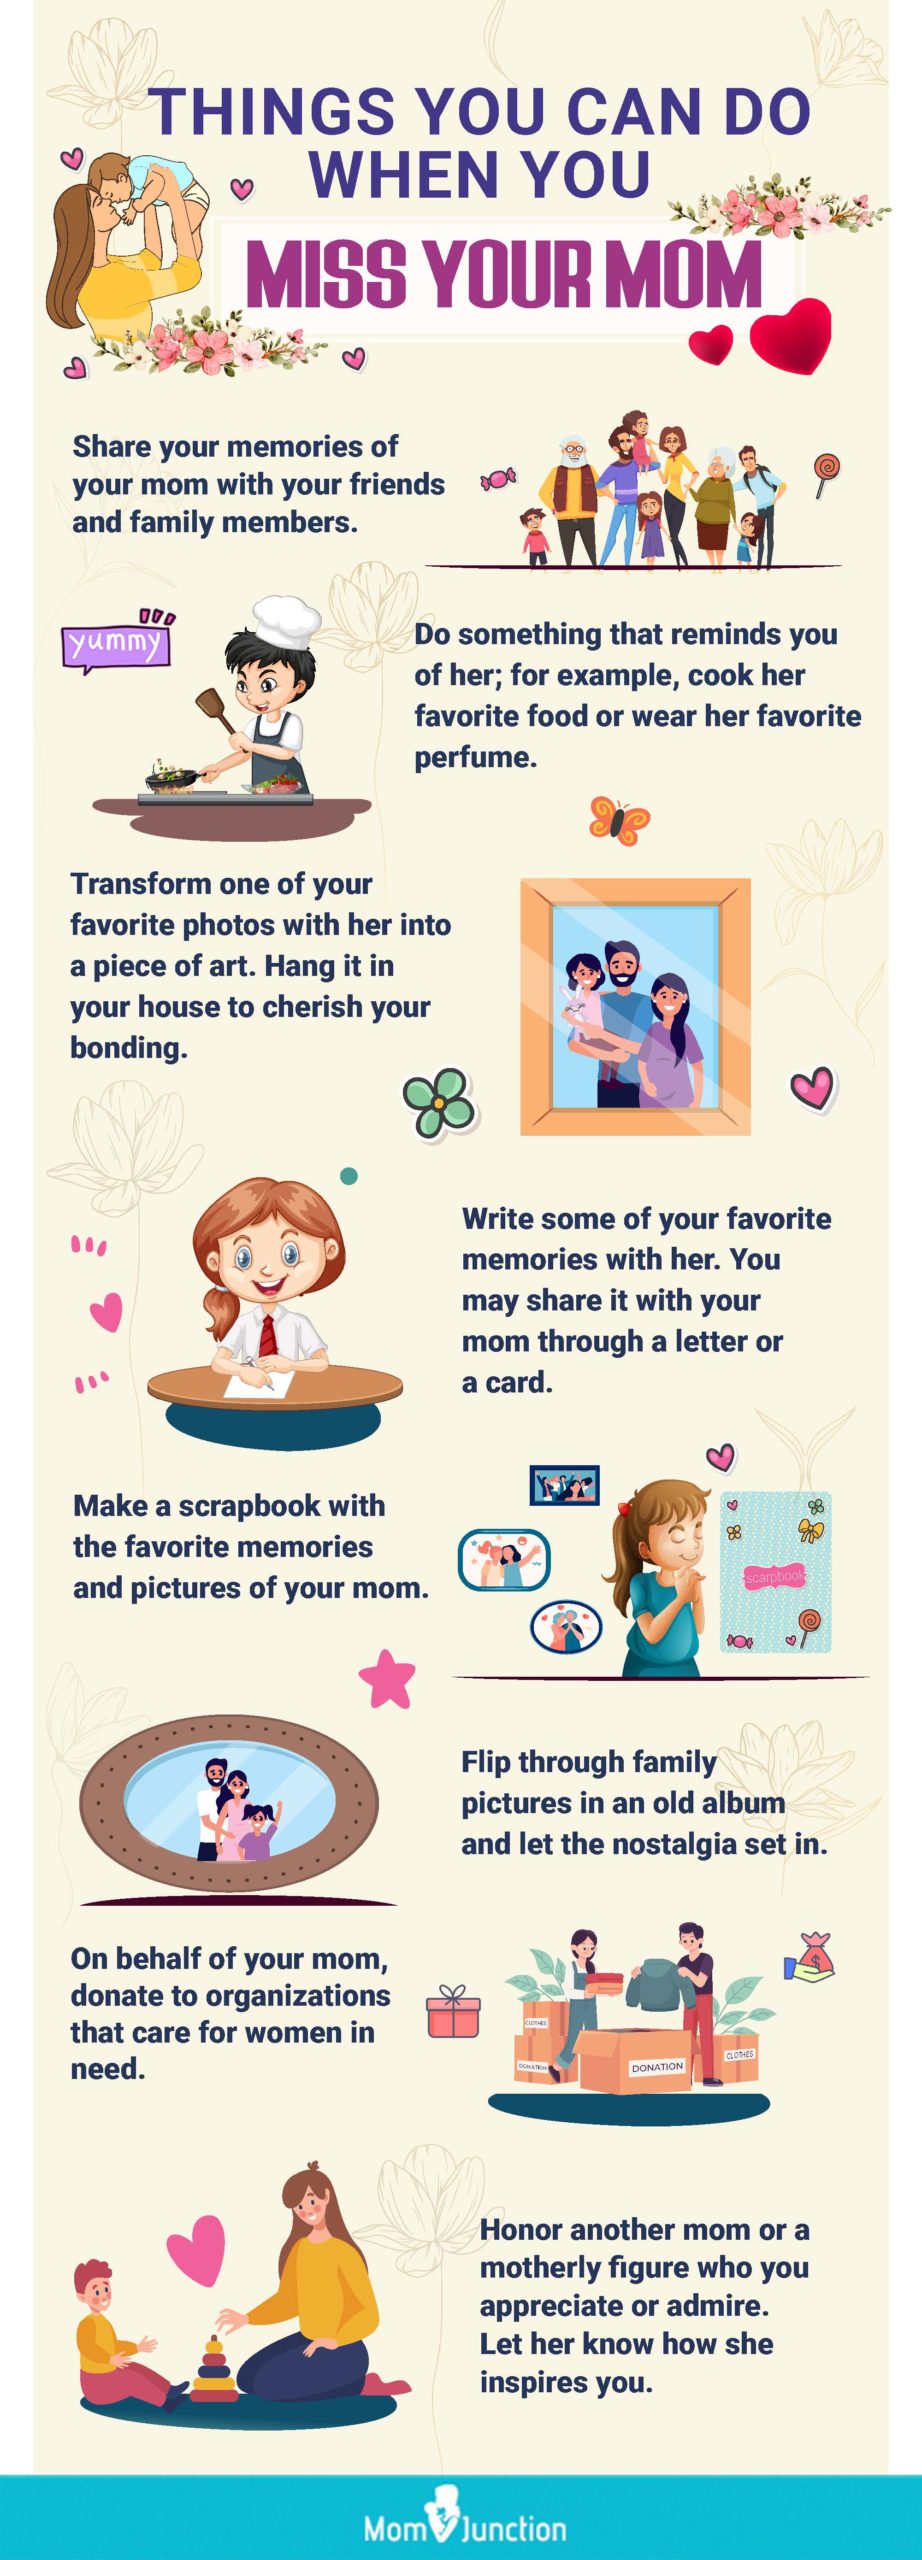 101 melting quotes about missing mom (infographic)